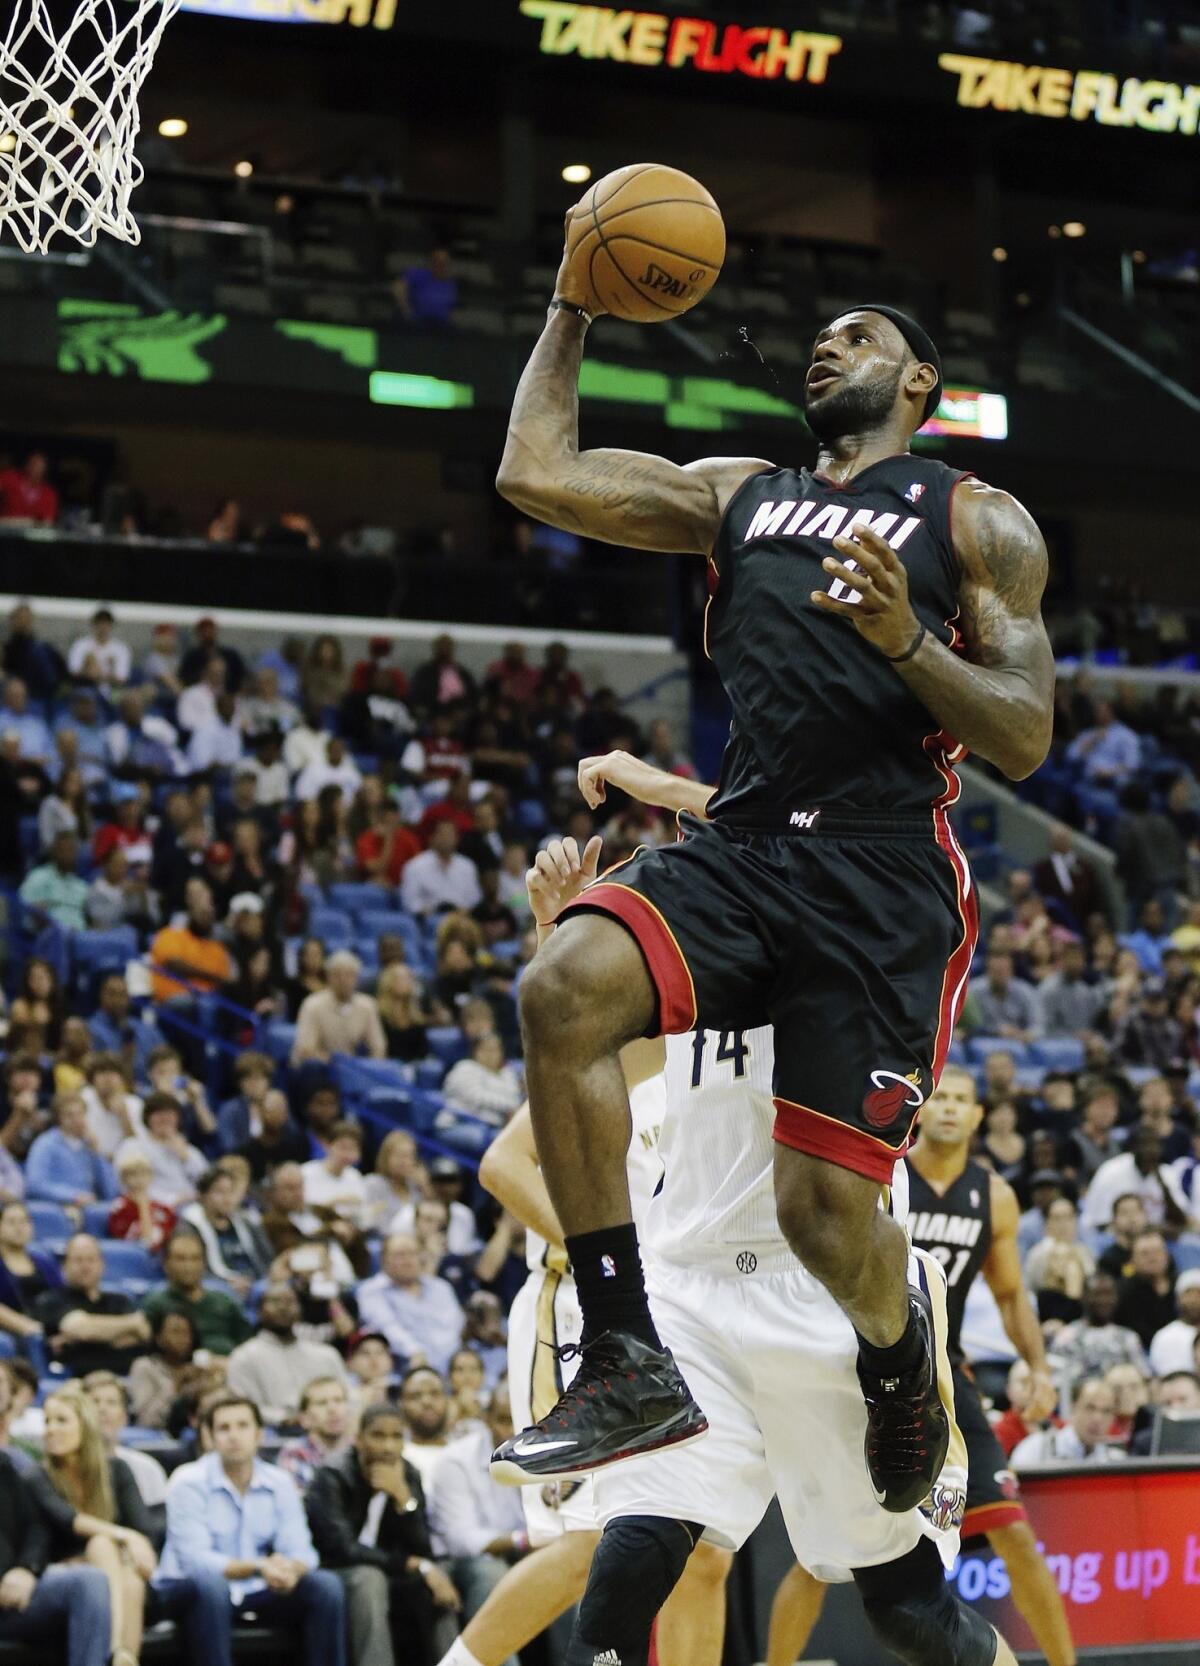 Does any team in the NBA's Eastern Conference have a chance at beating LeBron James and the Miami Heat this season?